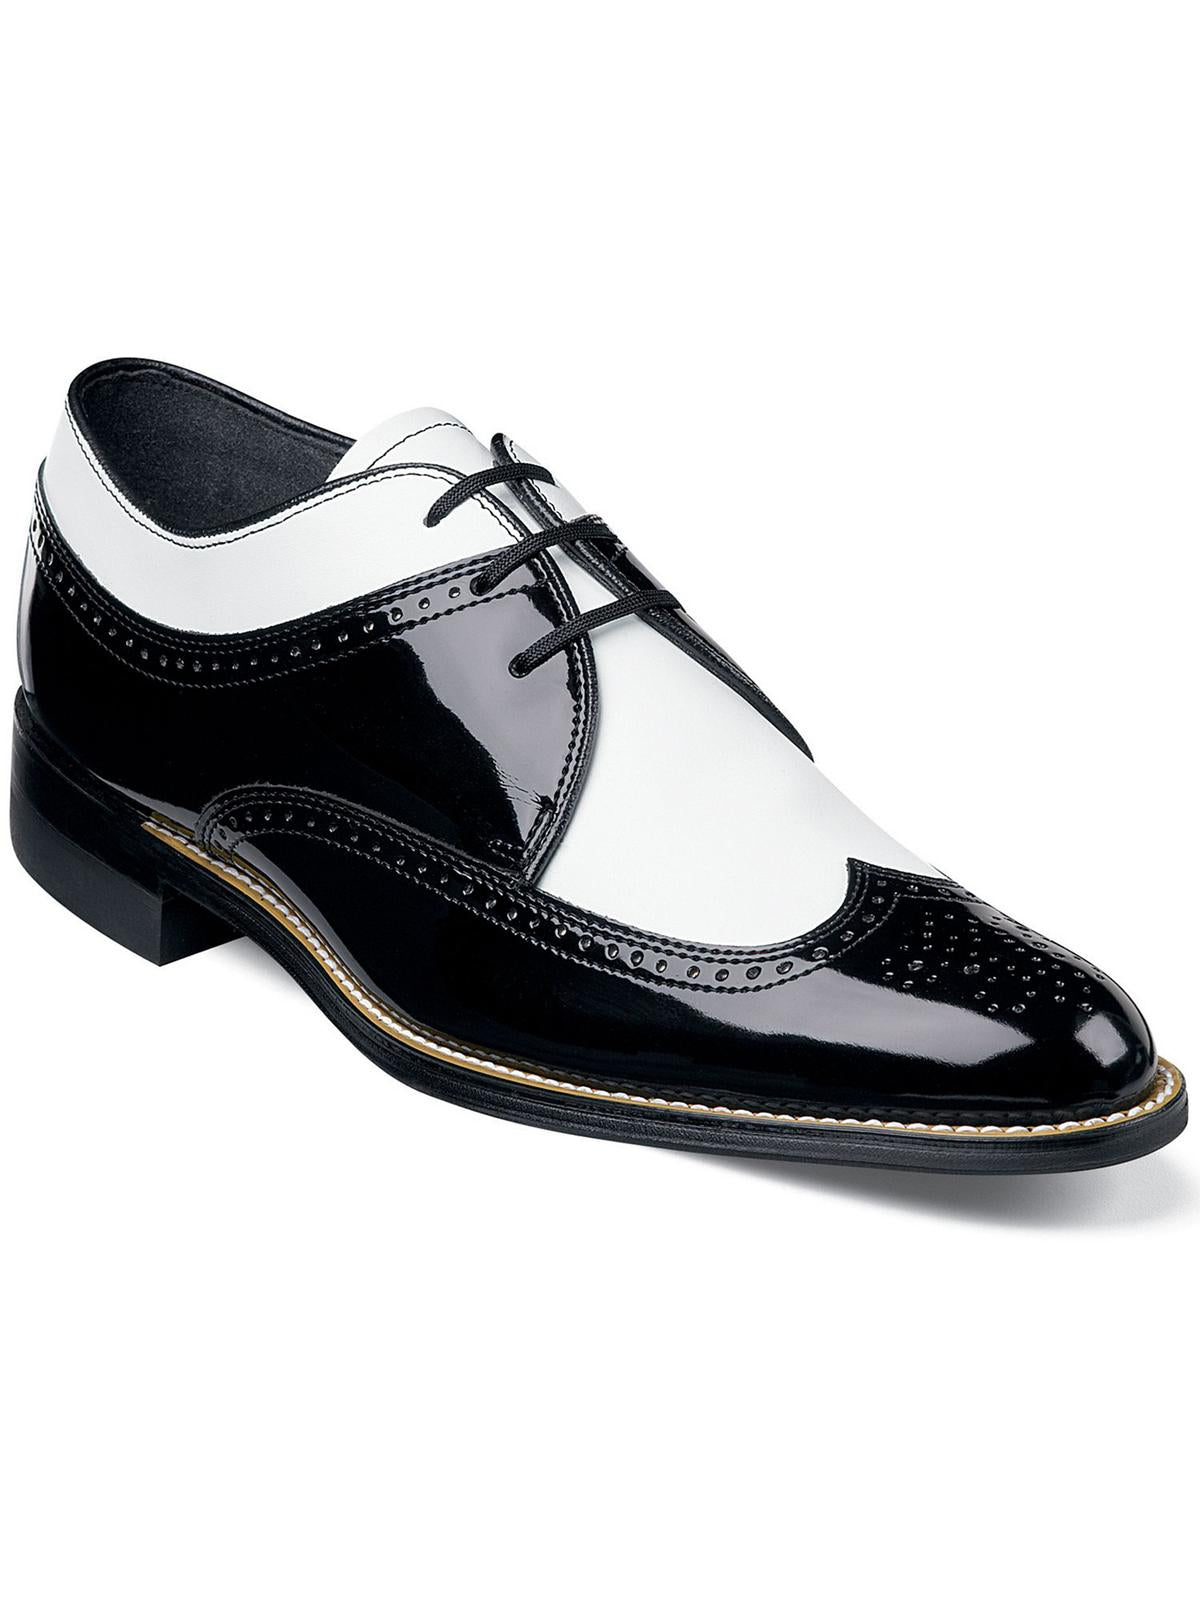 STACY ADAMS Dayton Mens Patent Leather Wing-Tip Oxfords